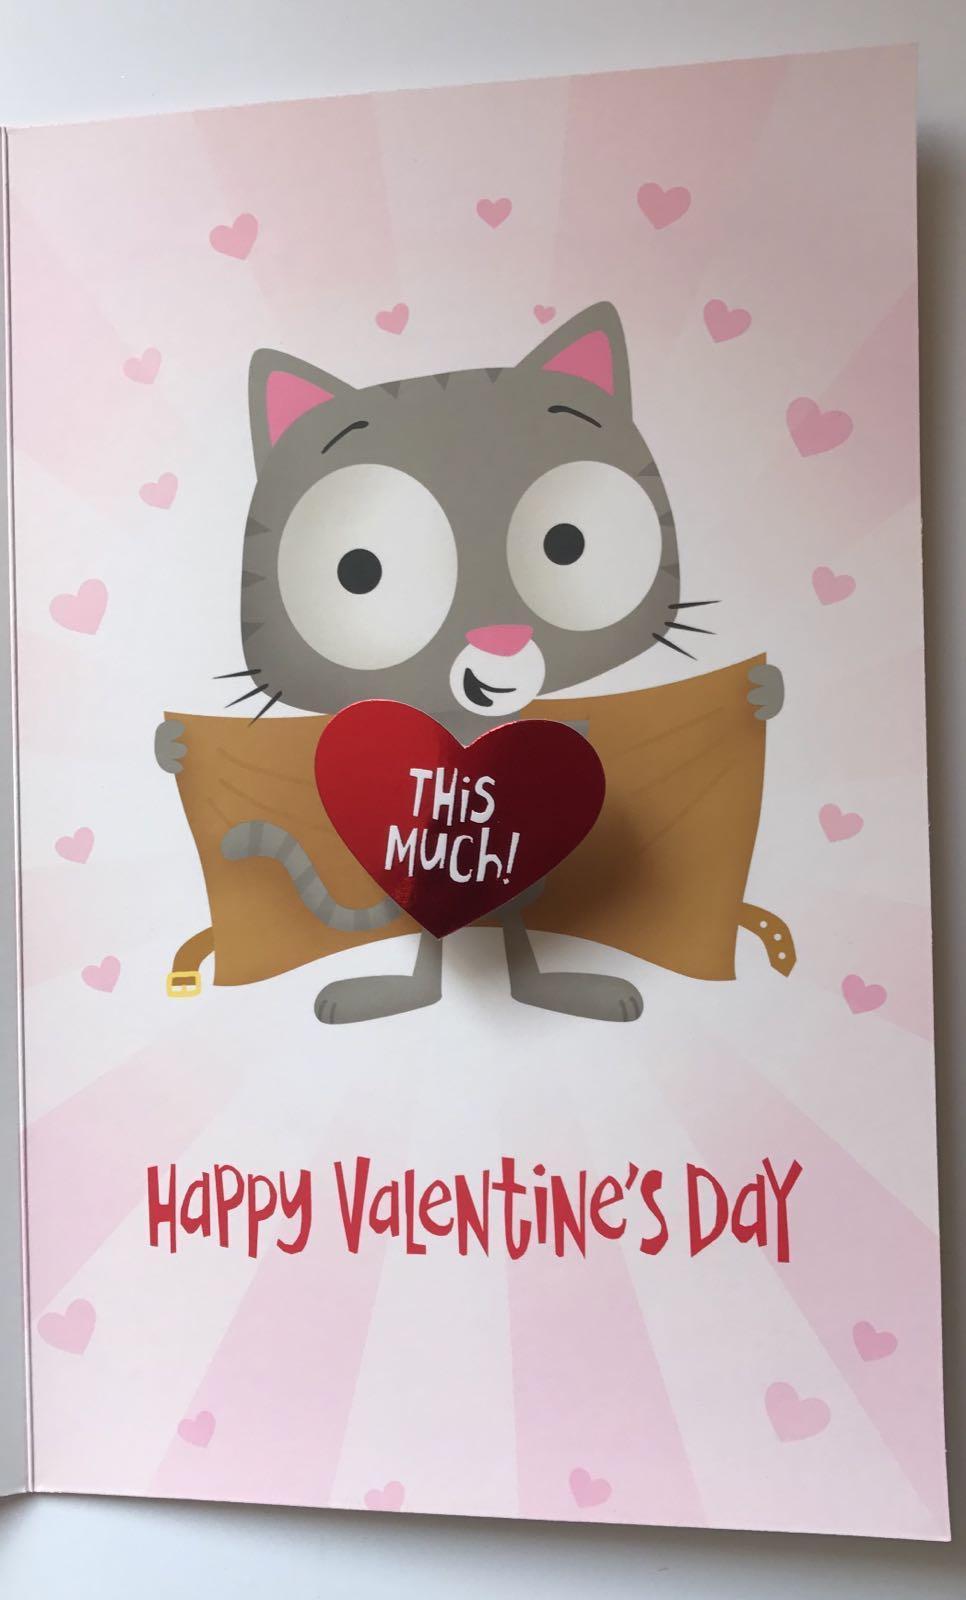 Girlfriend Valentine's Day Pop Up Card Do You Know How Much I Love You